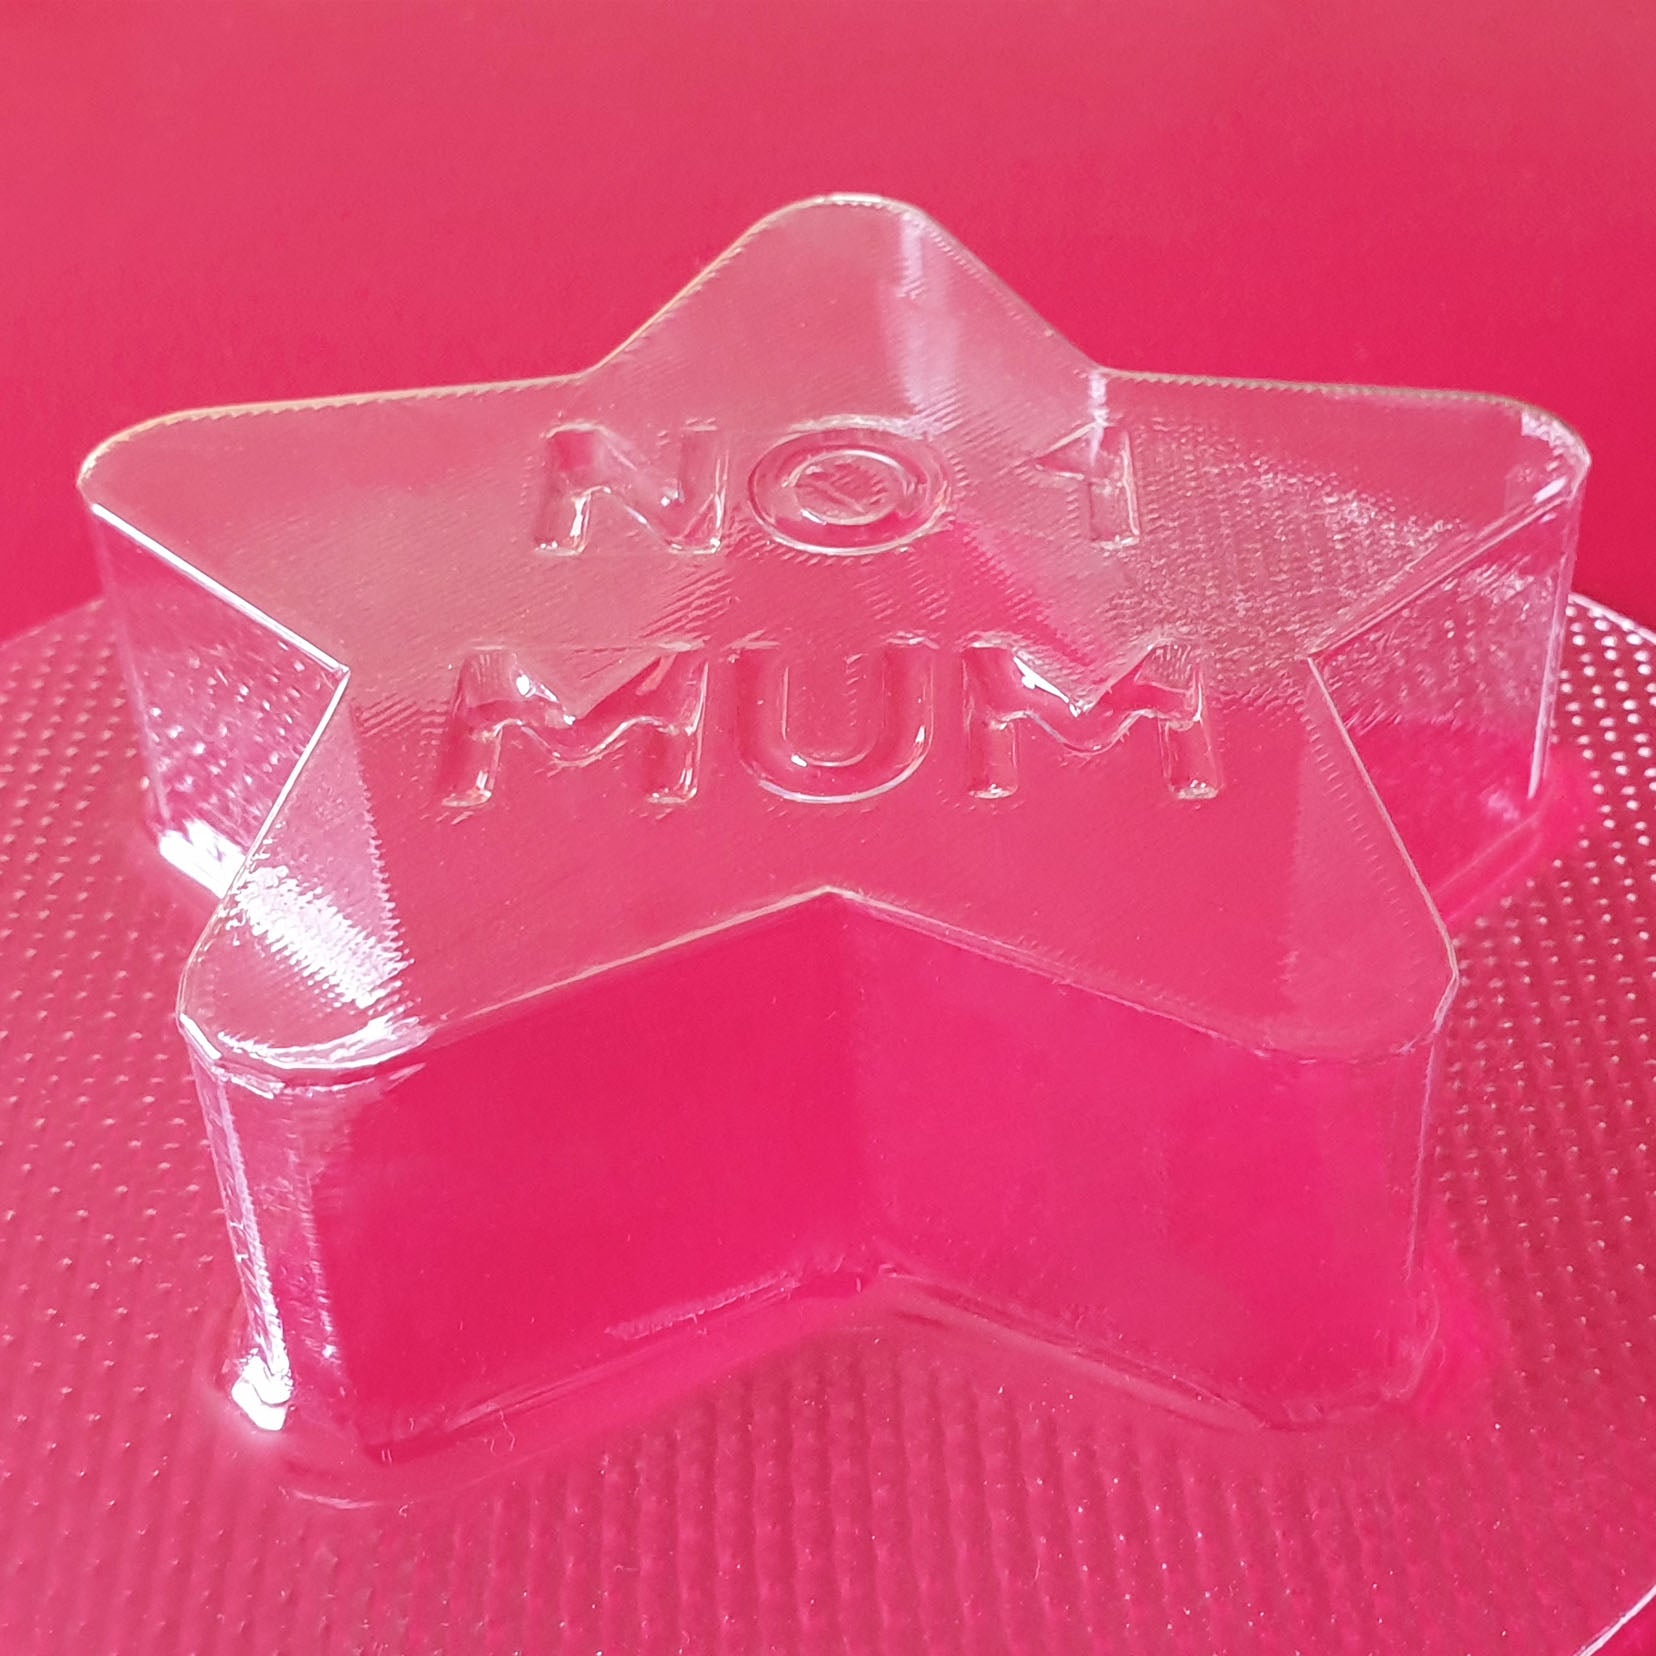 No1 Mum Star Mould | Truly Personal | Bath Bomb, Soap, Resin, Chocolate, Jelly, Wax Melts Mold